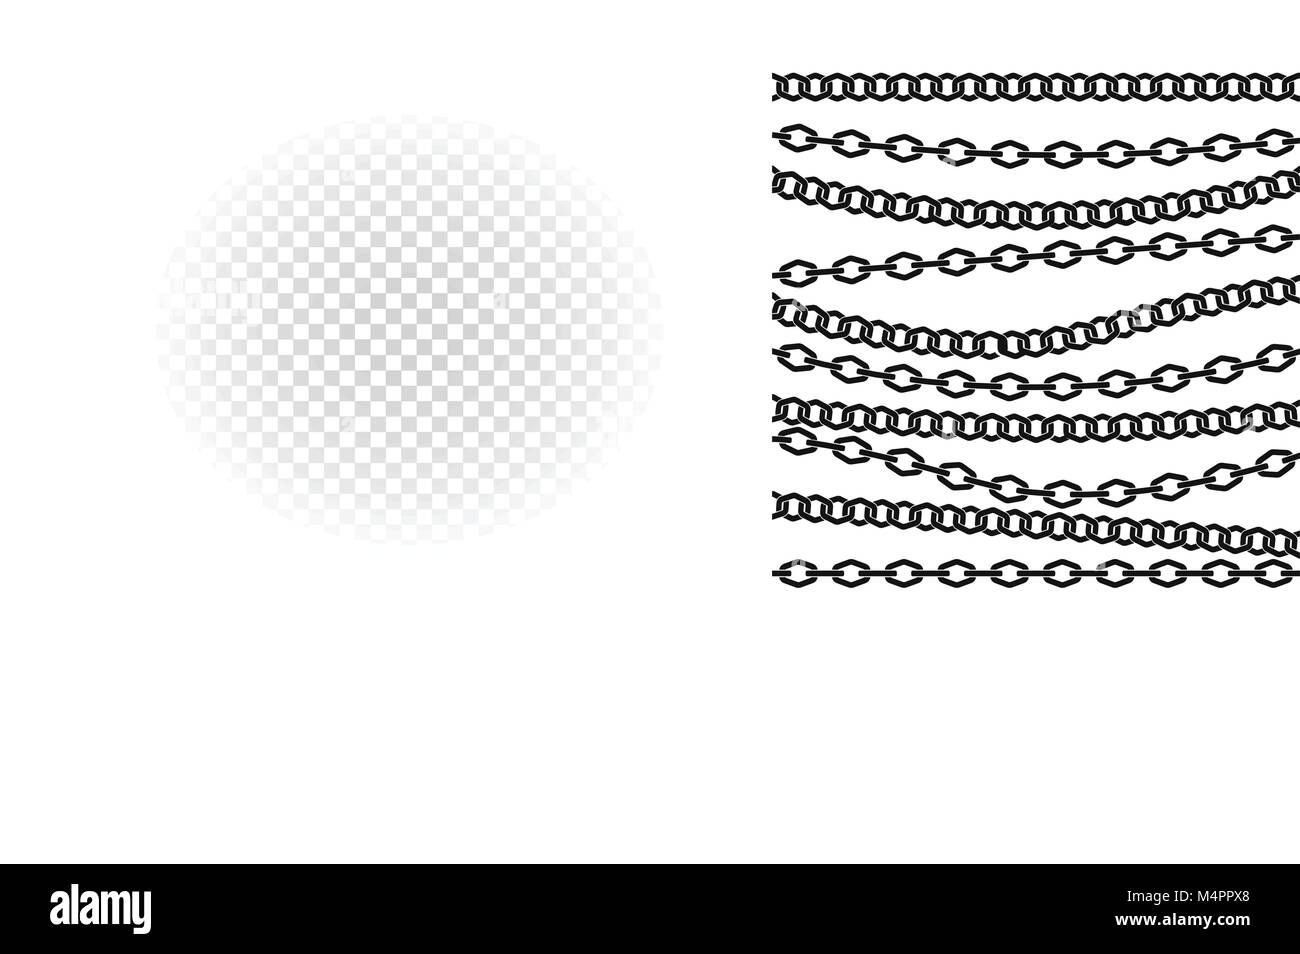 Chain vector pattern. Black silhouette on white background. Stock Vector